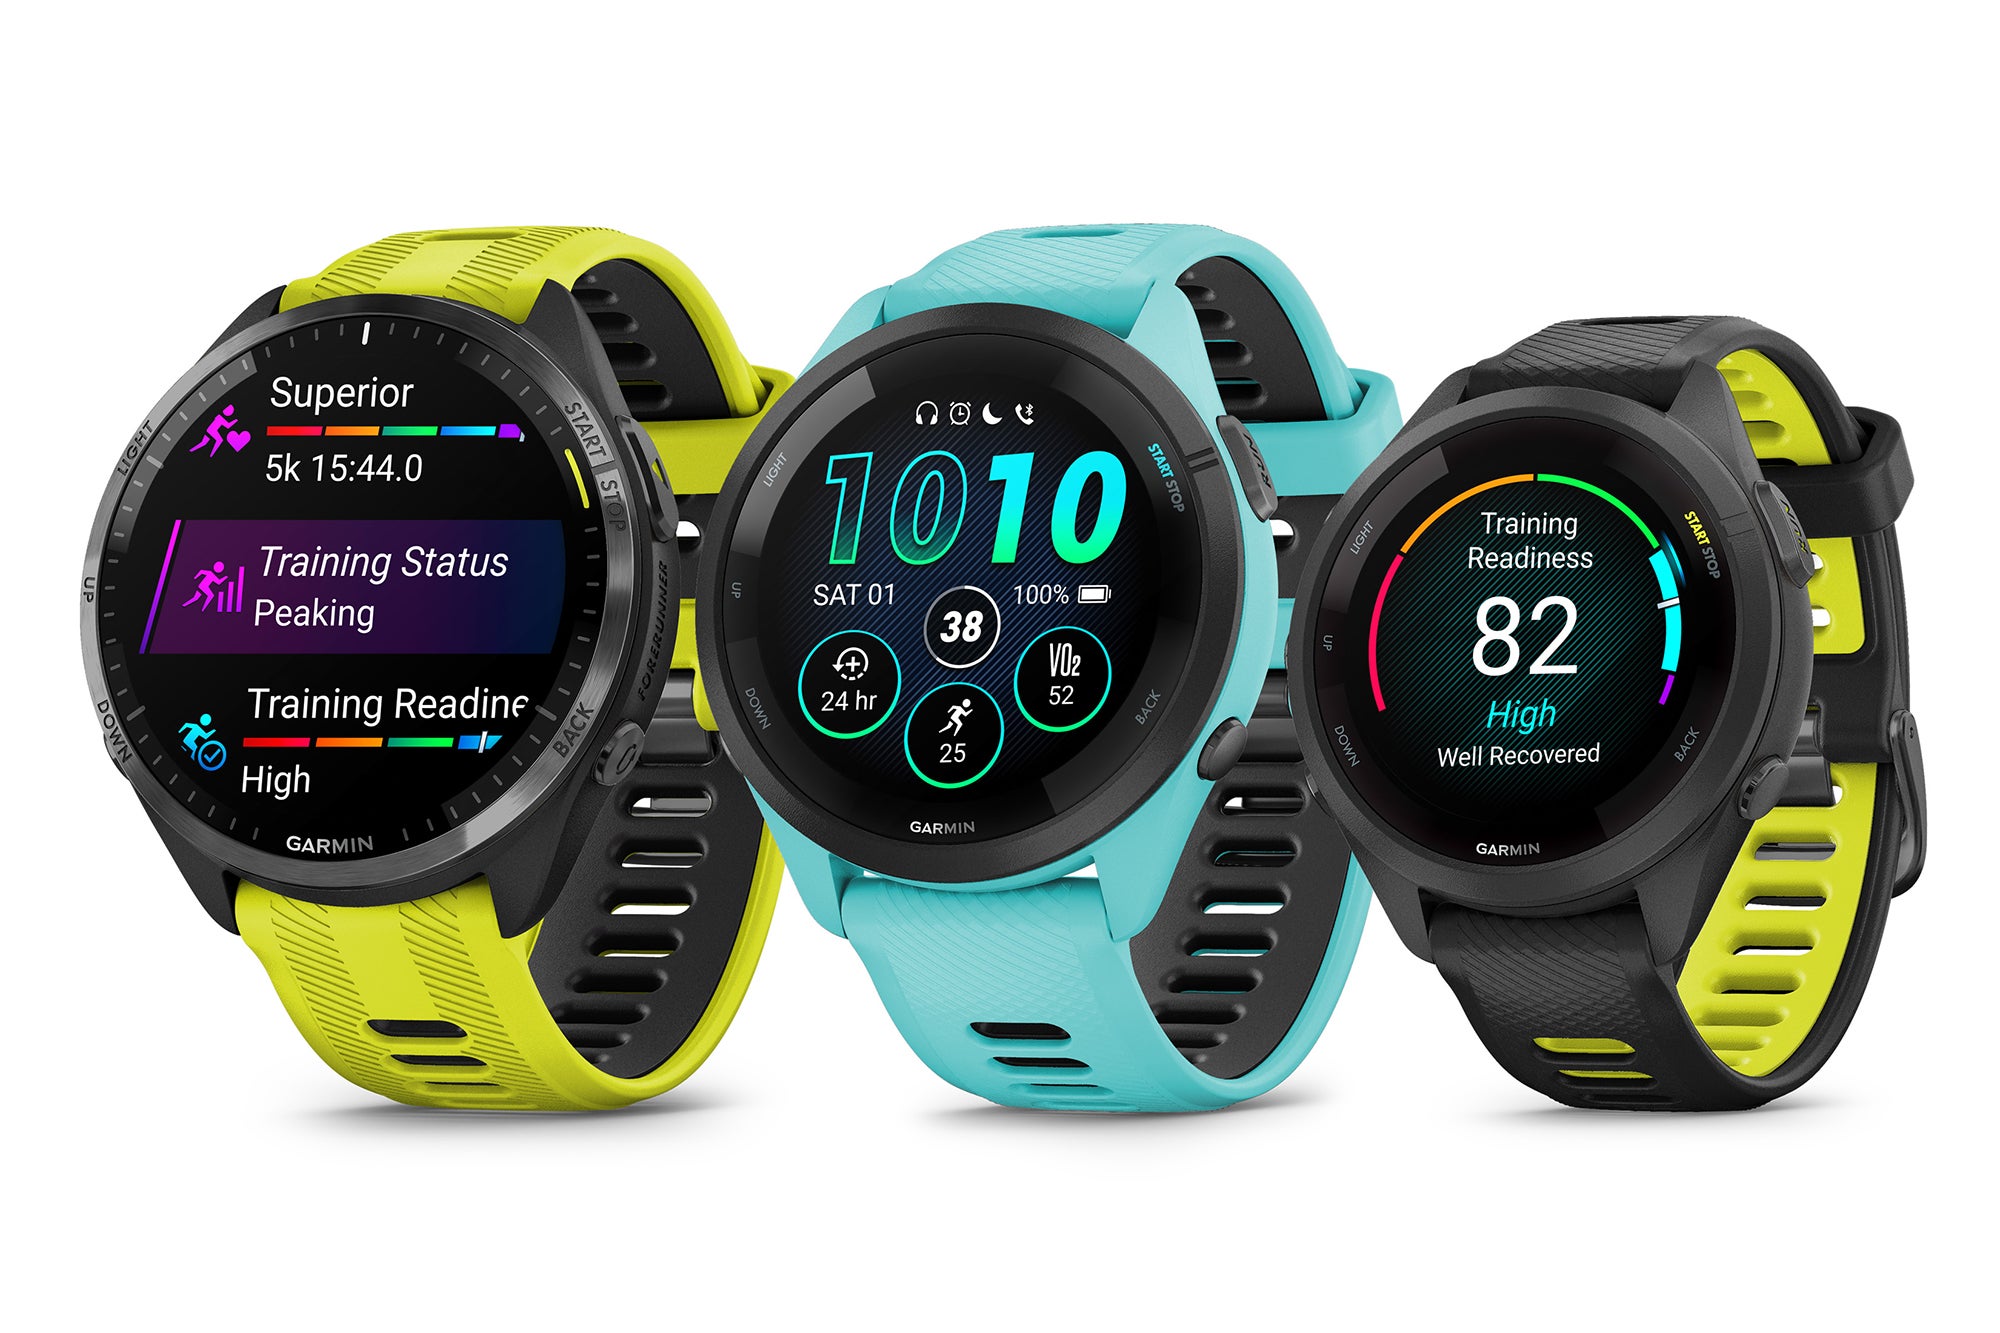 Garmin's latest running watches pair vivid visuals with your vitals